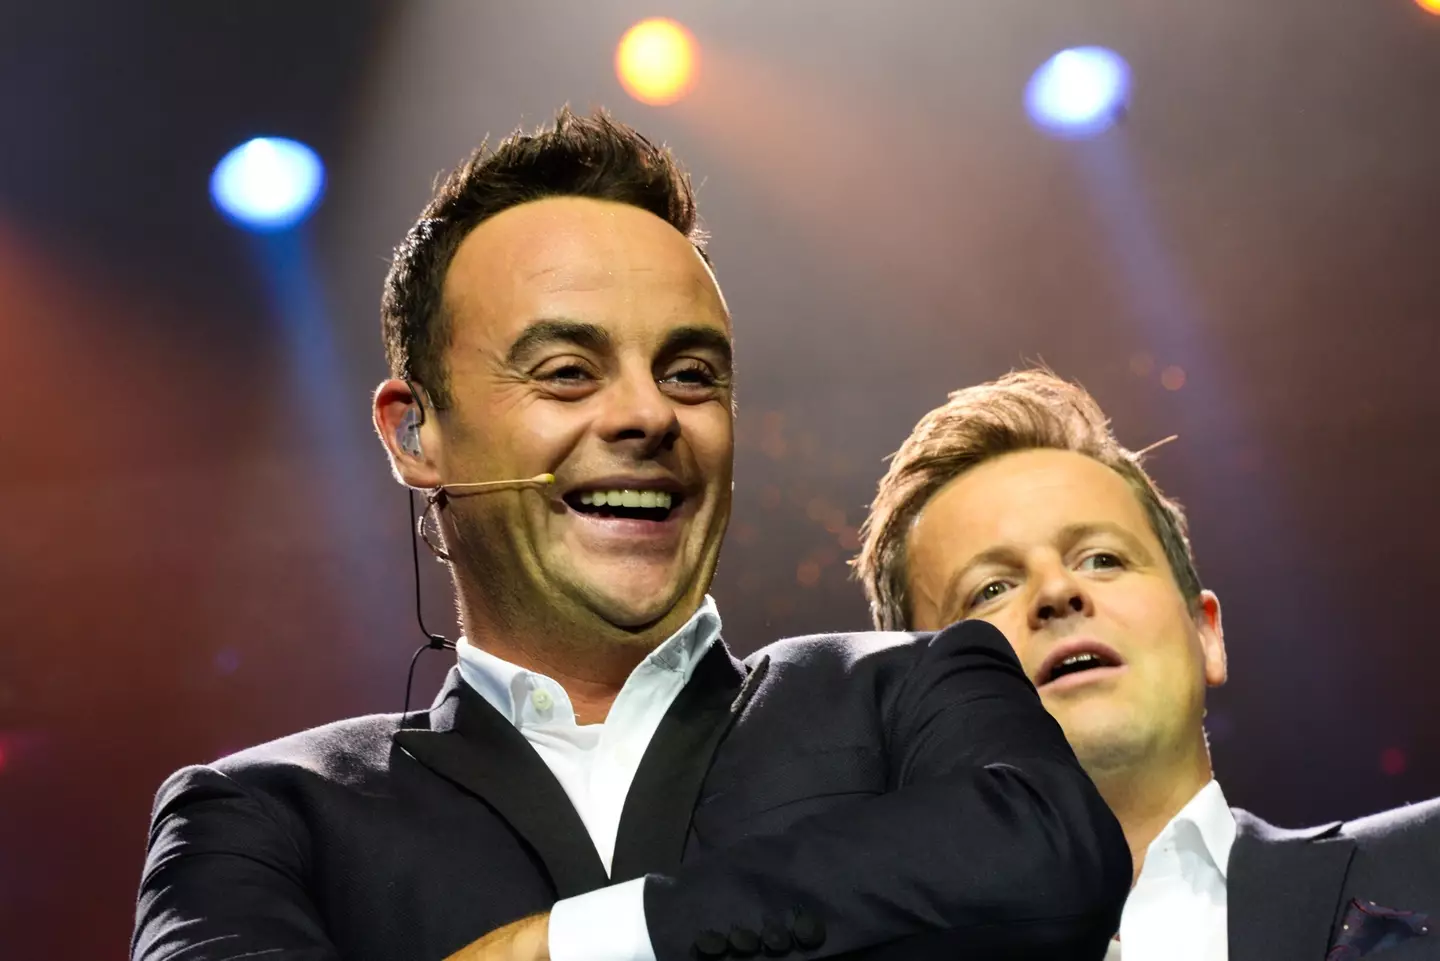 Ant and Dec found Matt Hancock's I'm A Celeb appearance just as hard as you did.